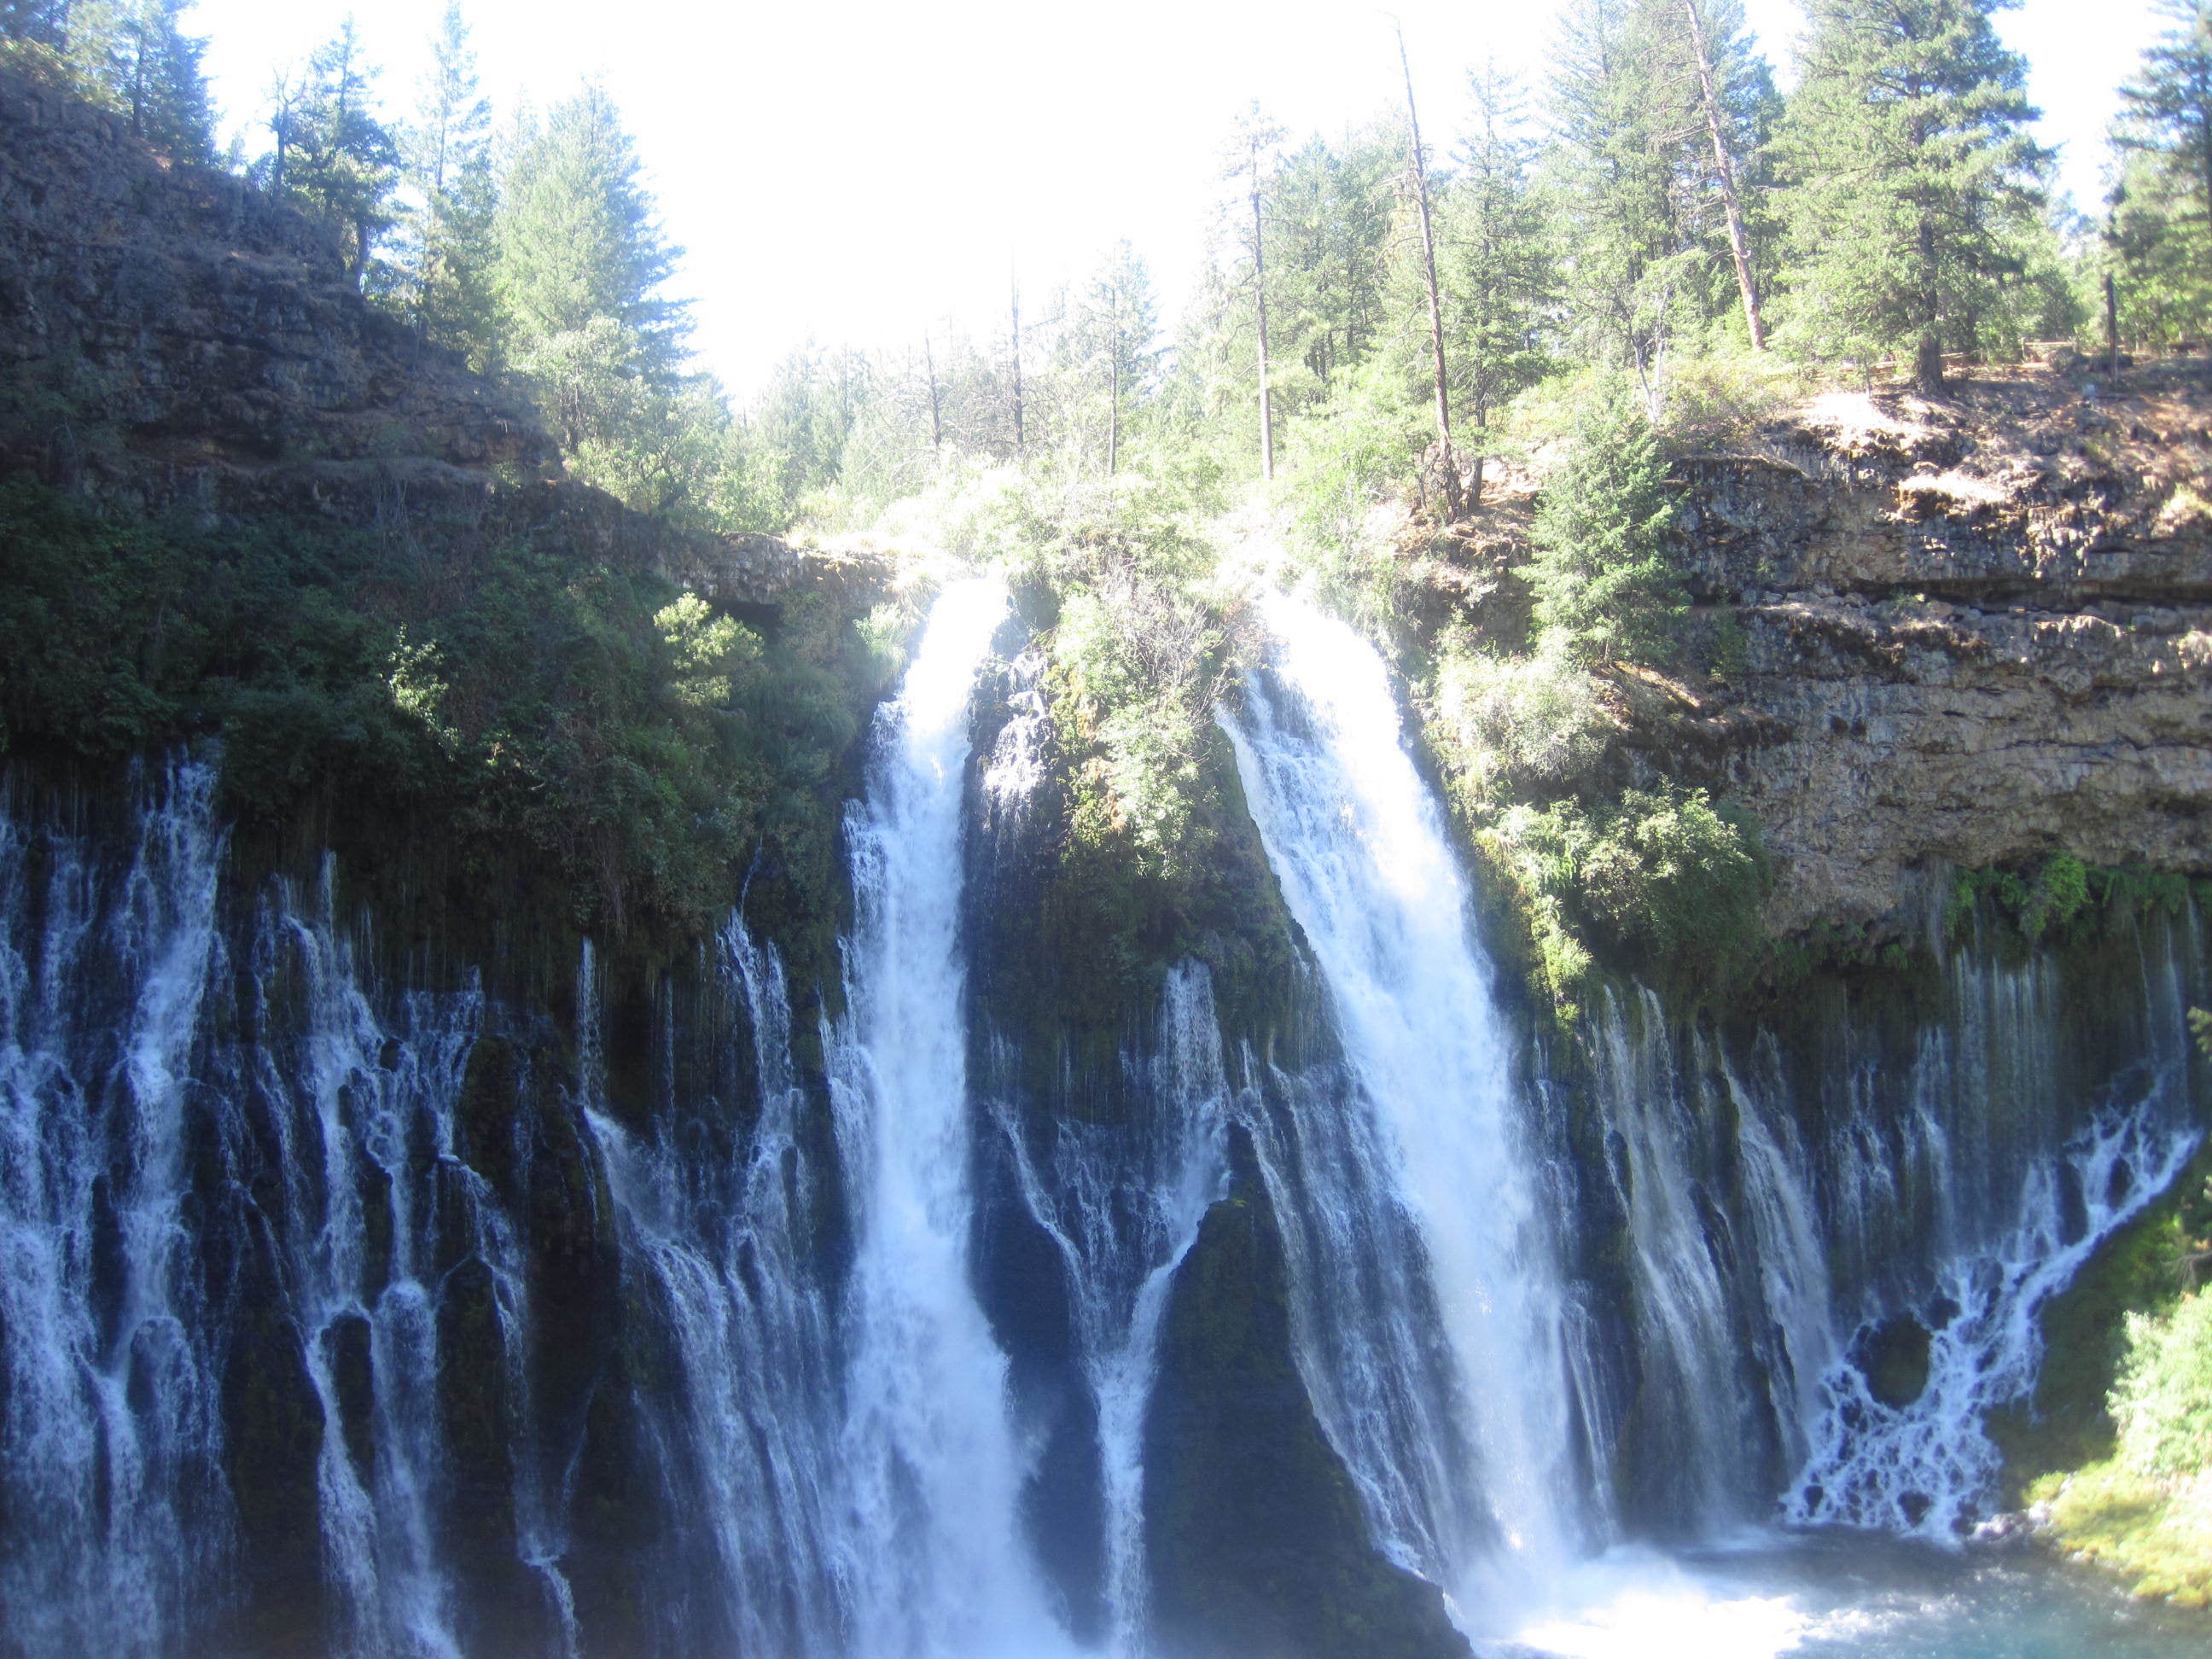 Camper submitted image from McArthur-Burney Falls Memorial State Park - 3